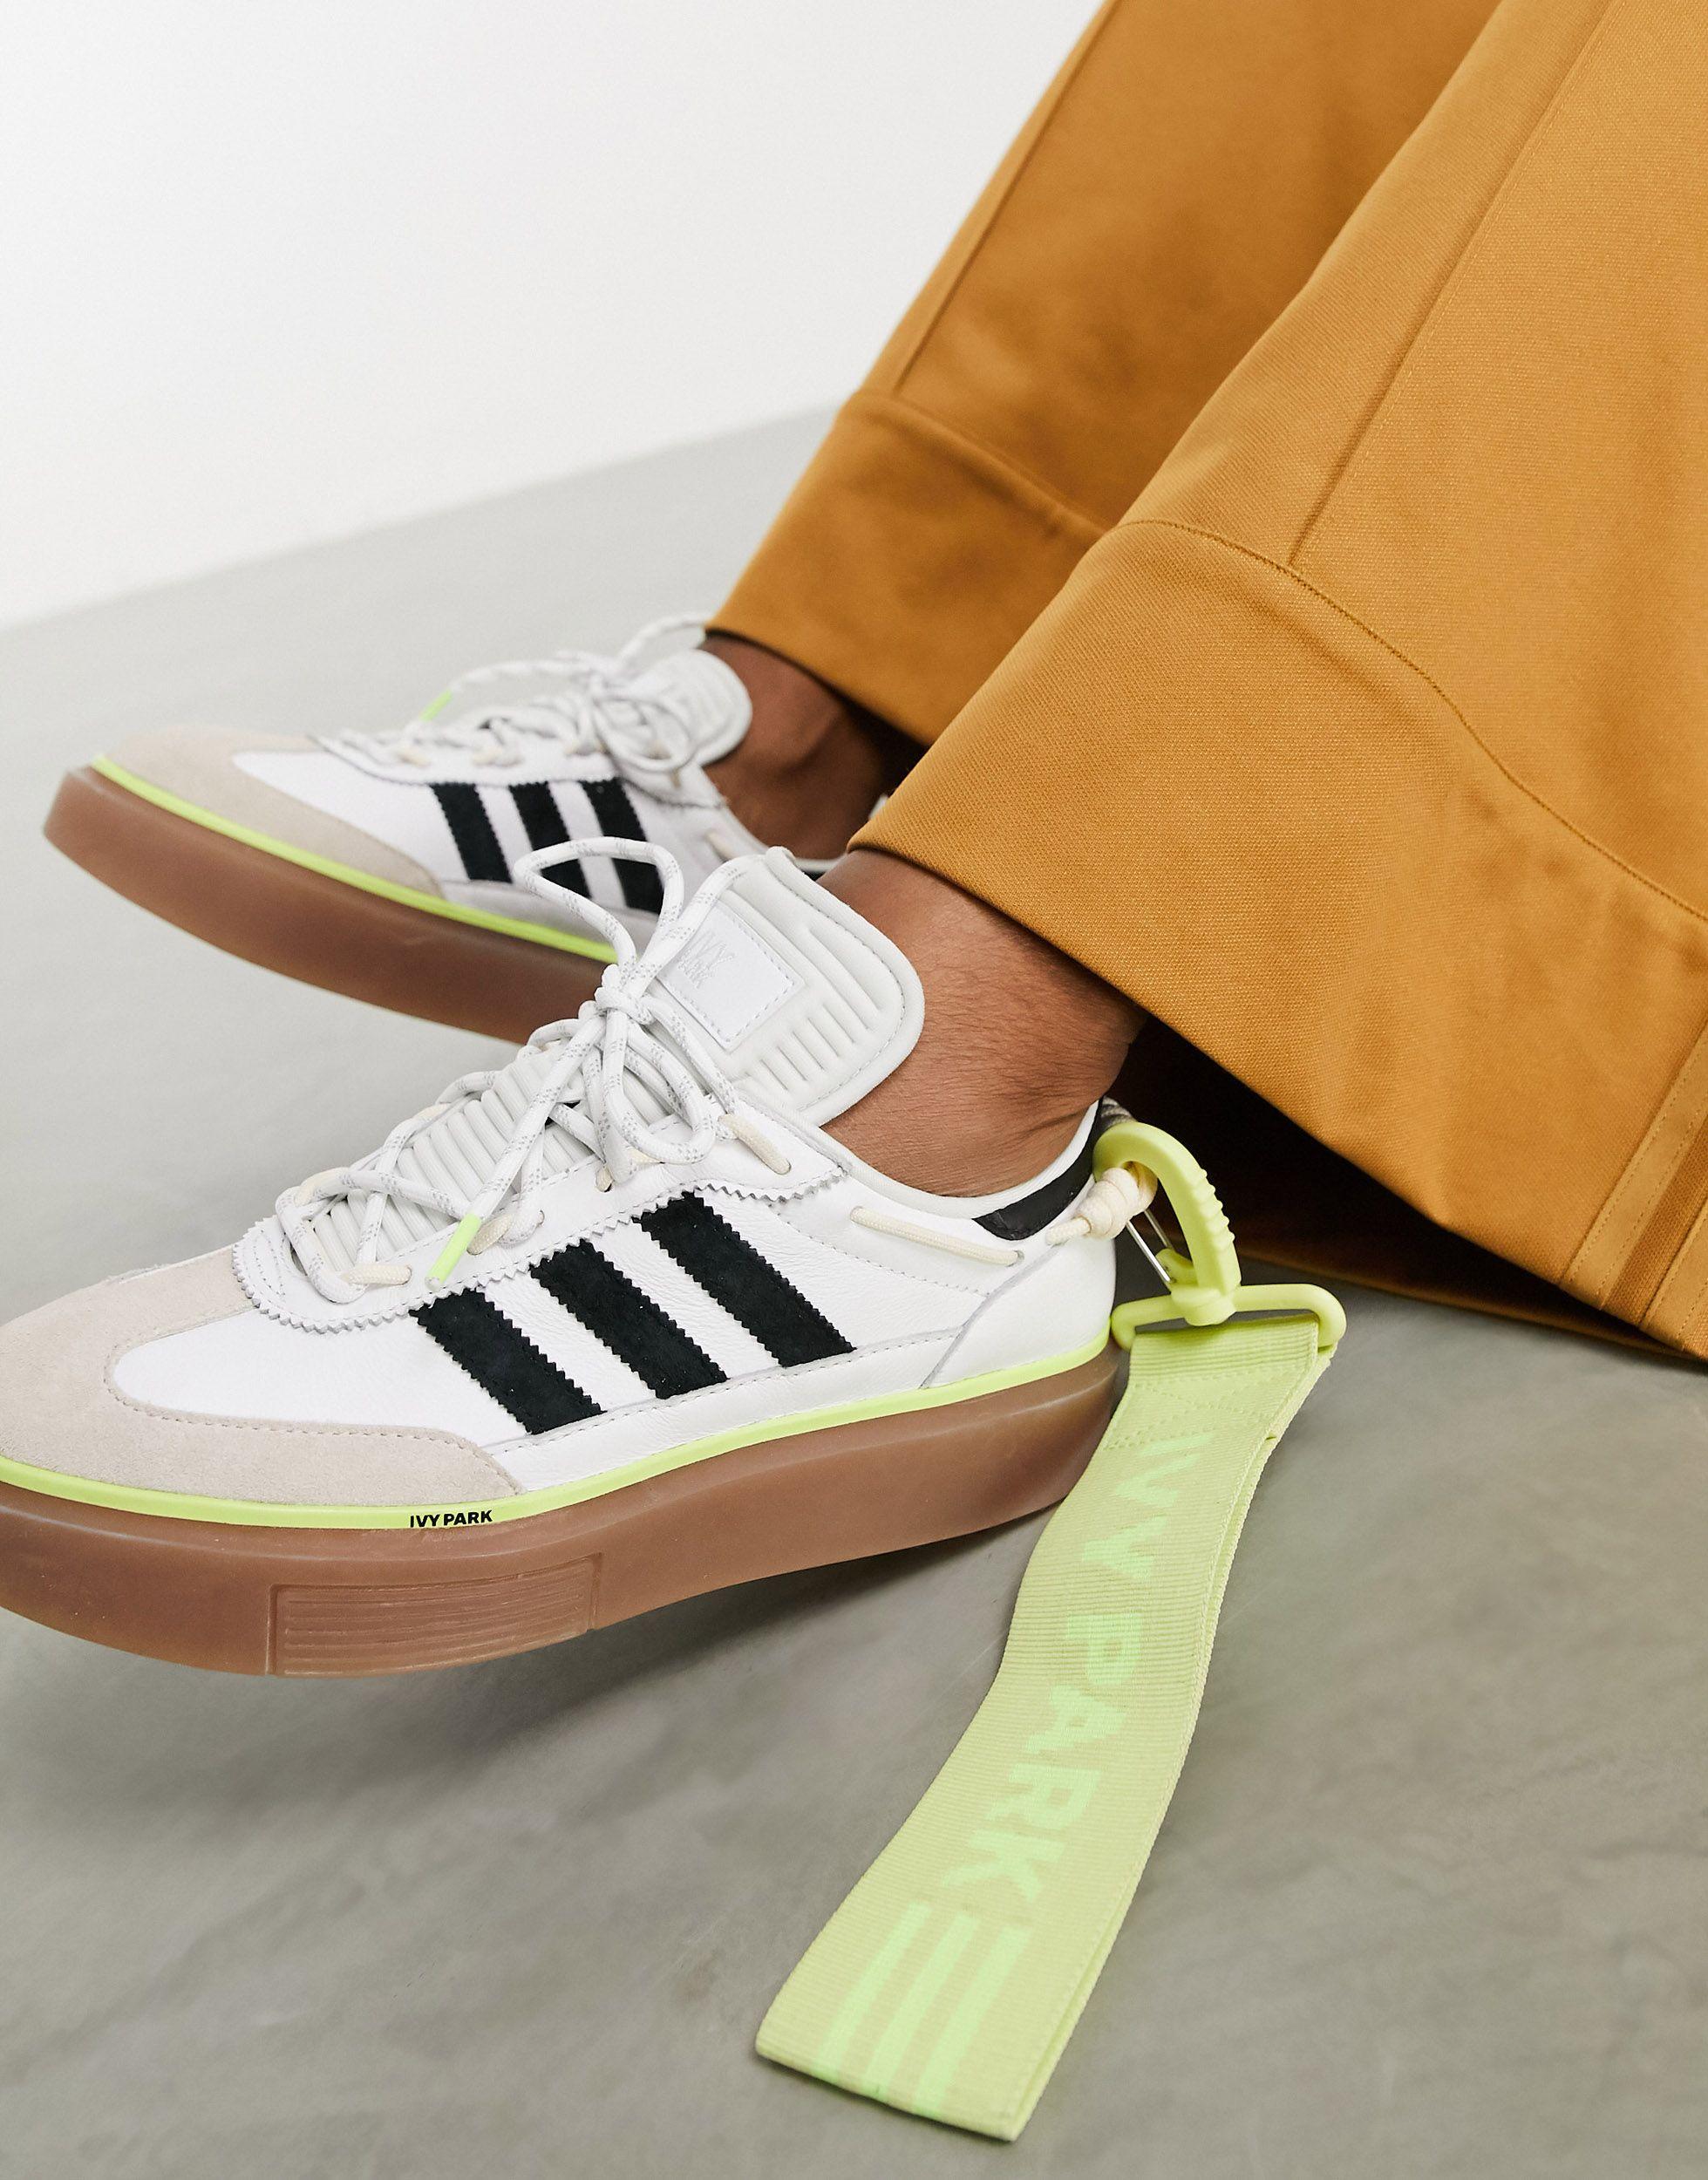 Ivy Park Adidas Super Sleek 72 Trainers in White | Lyst